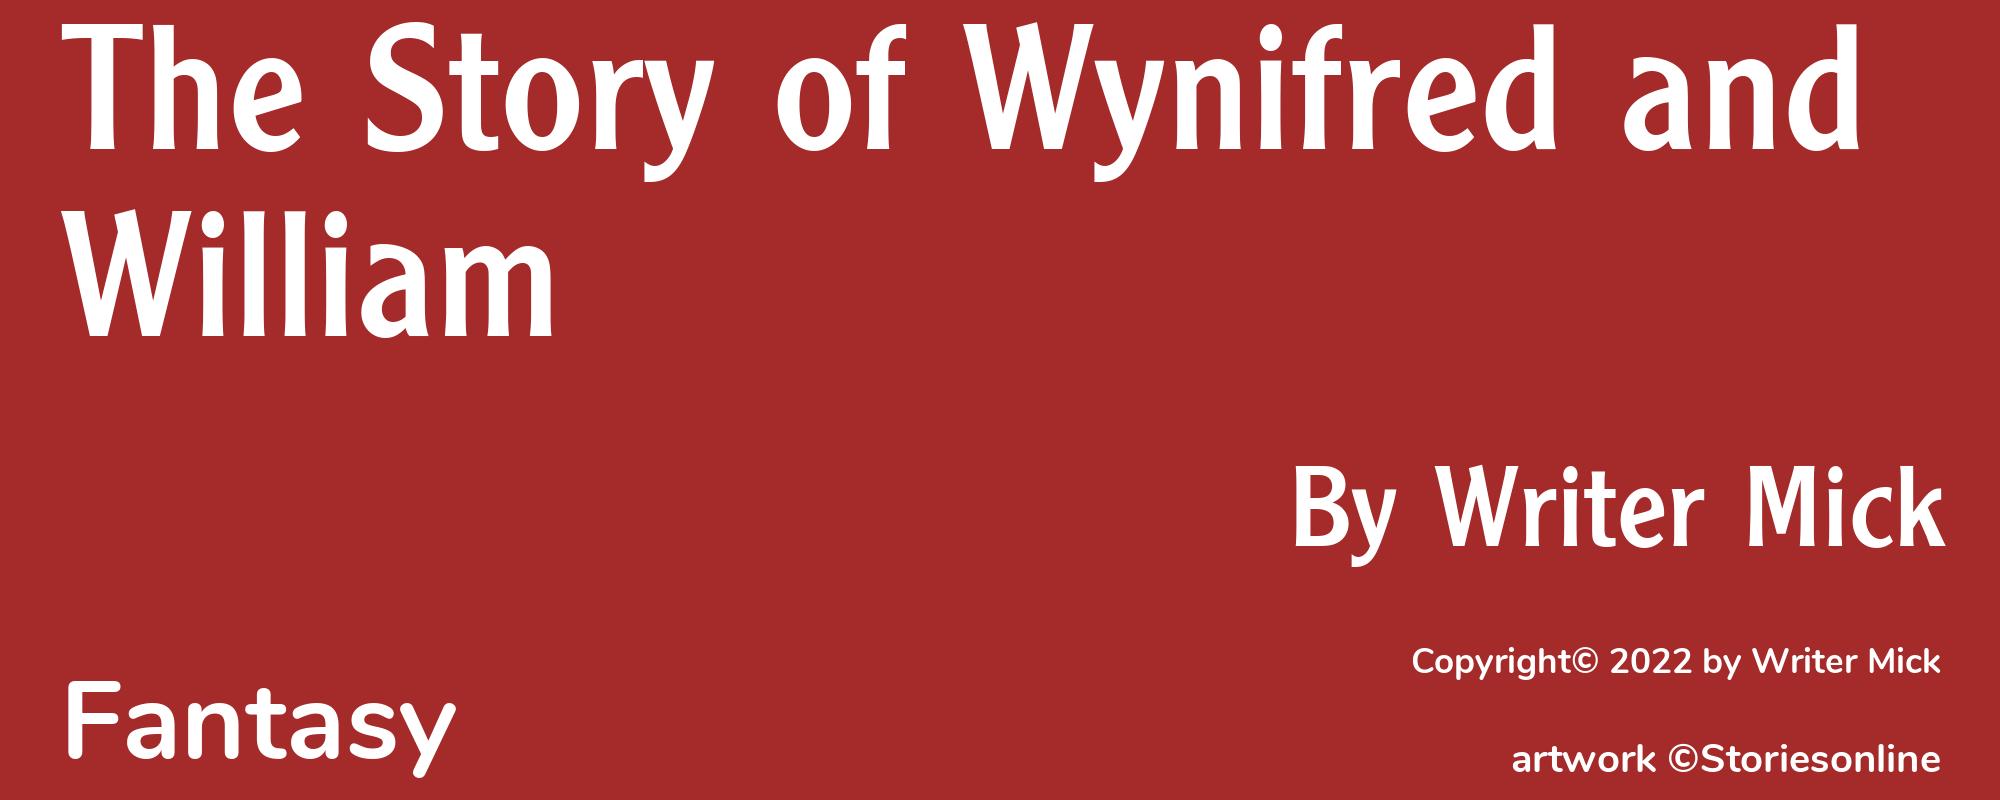 The Story of Wynifred and William - Cover